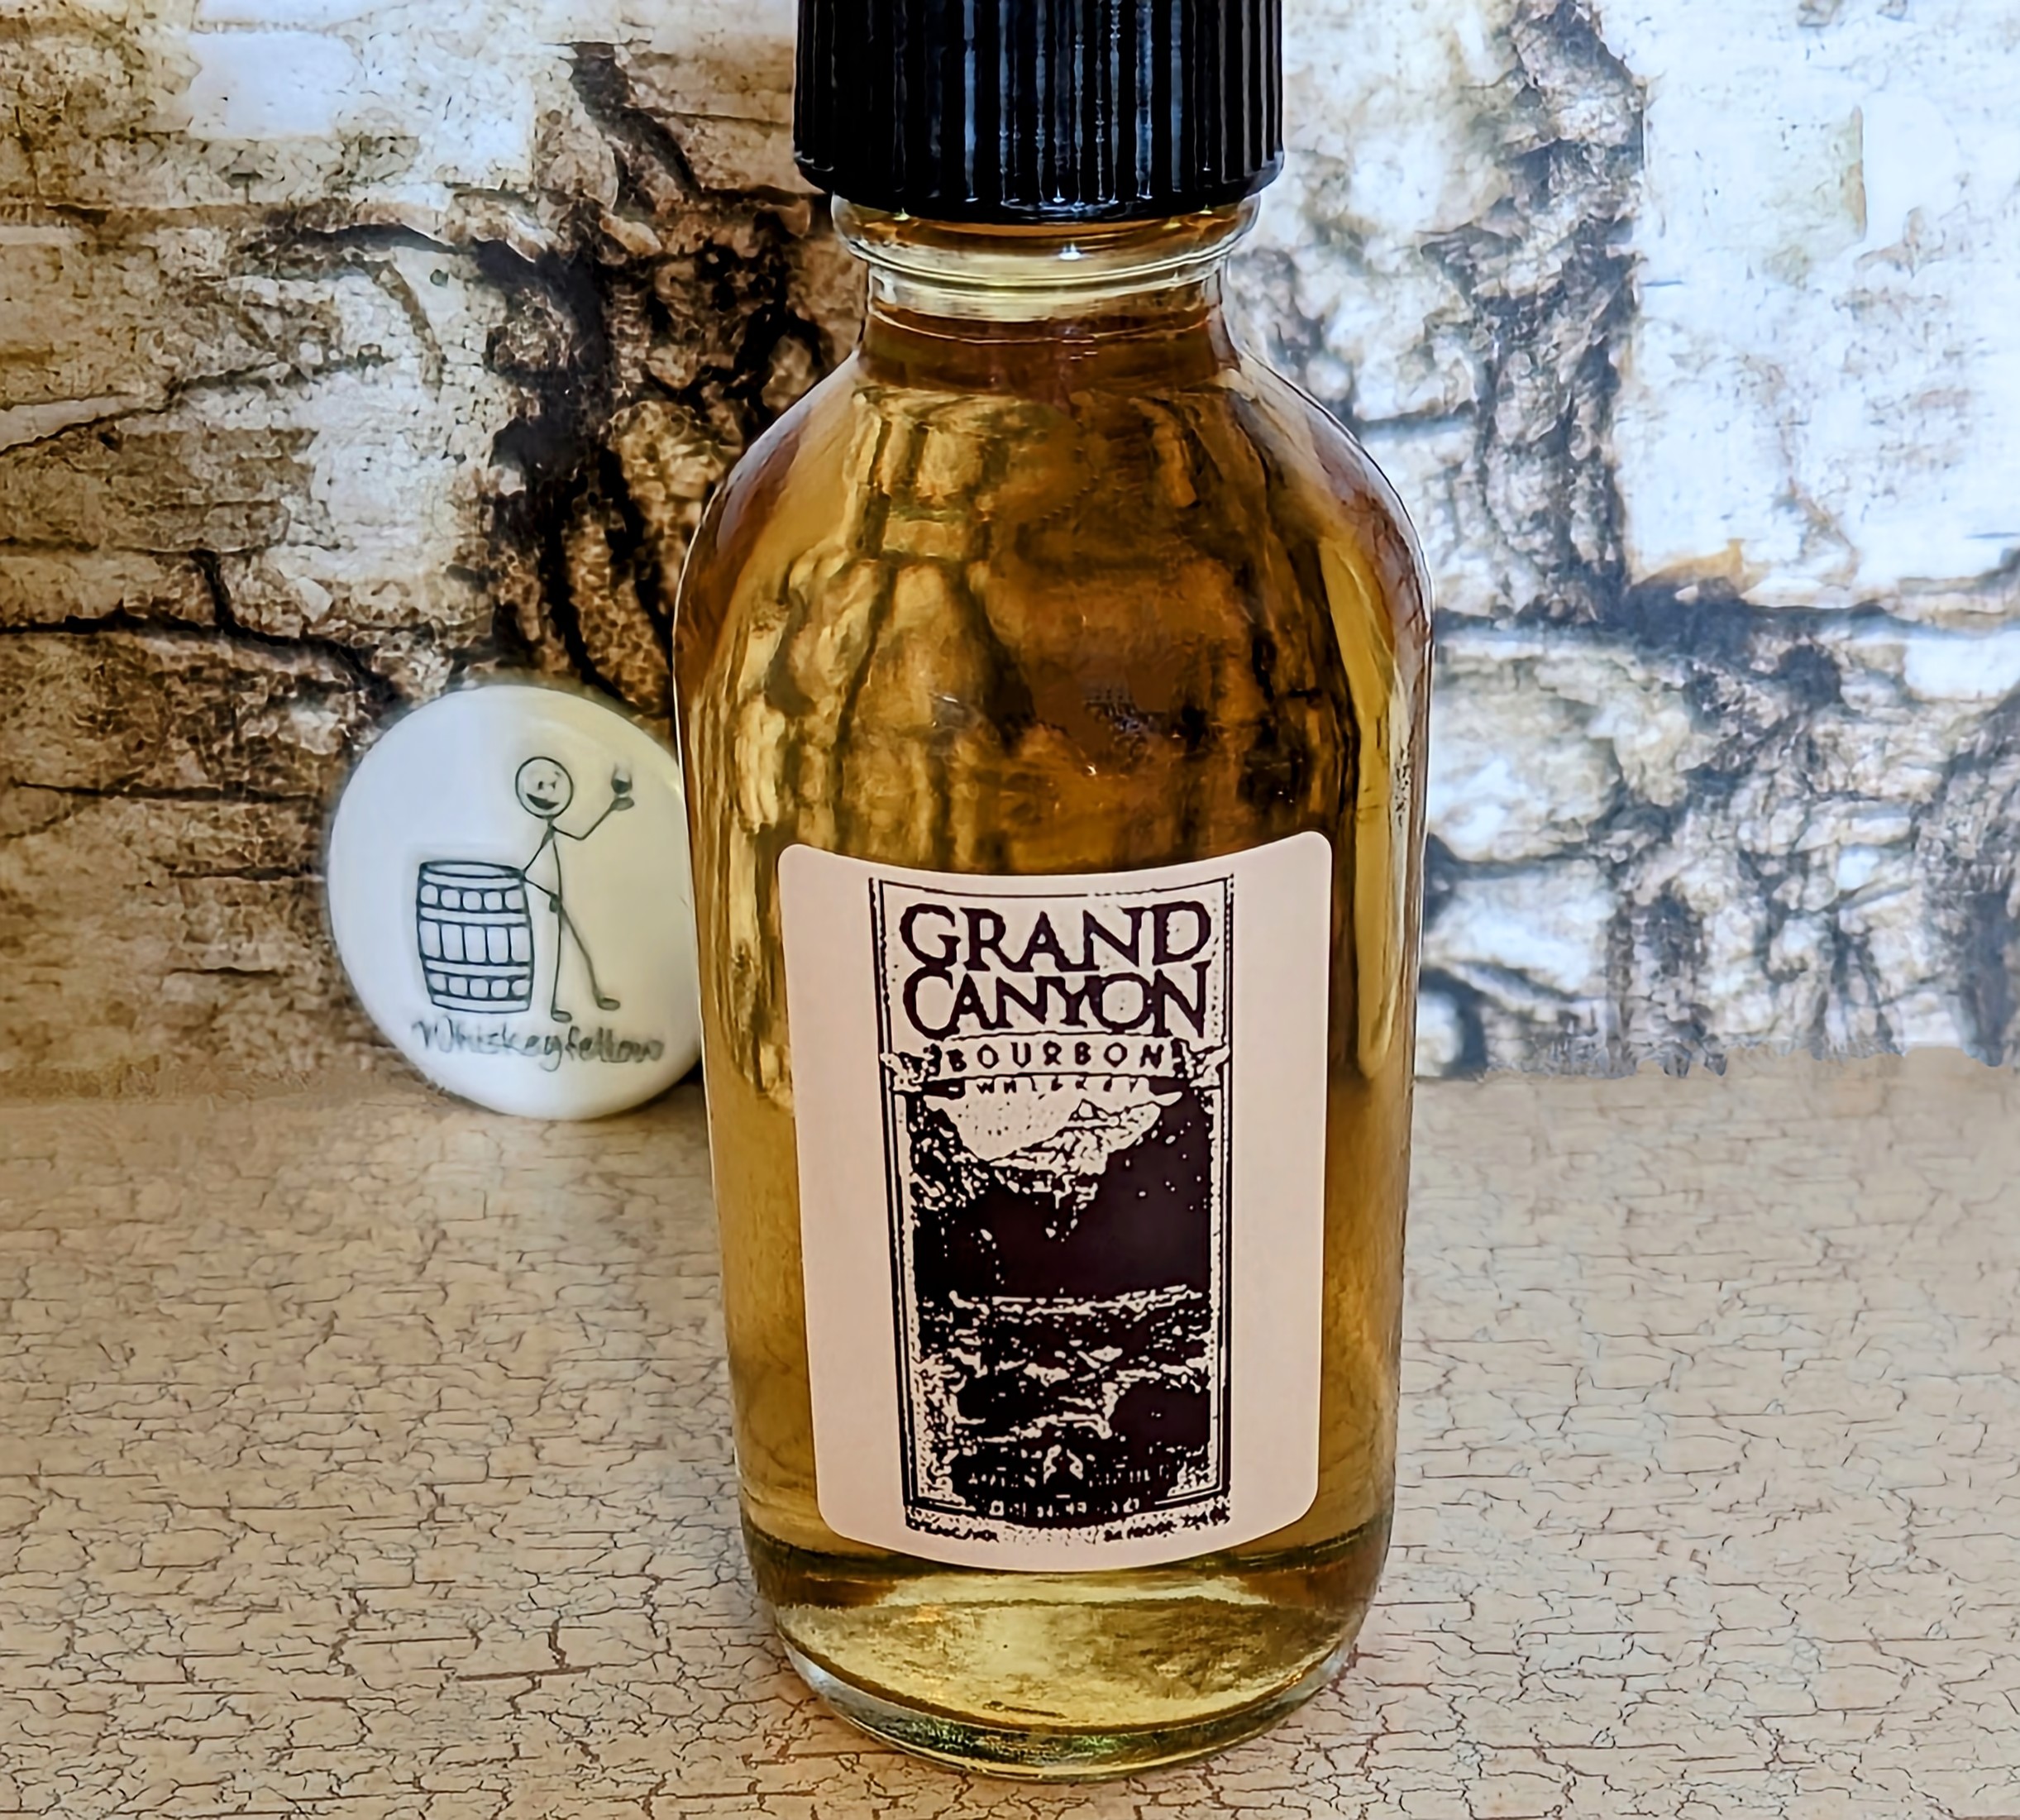 Grand Canyon Bourbon Review & Tasting Notes